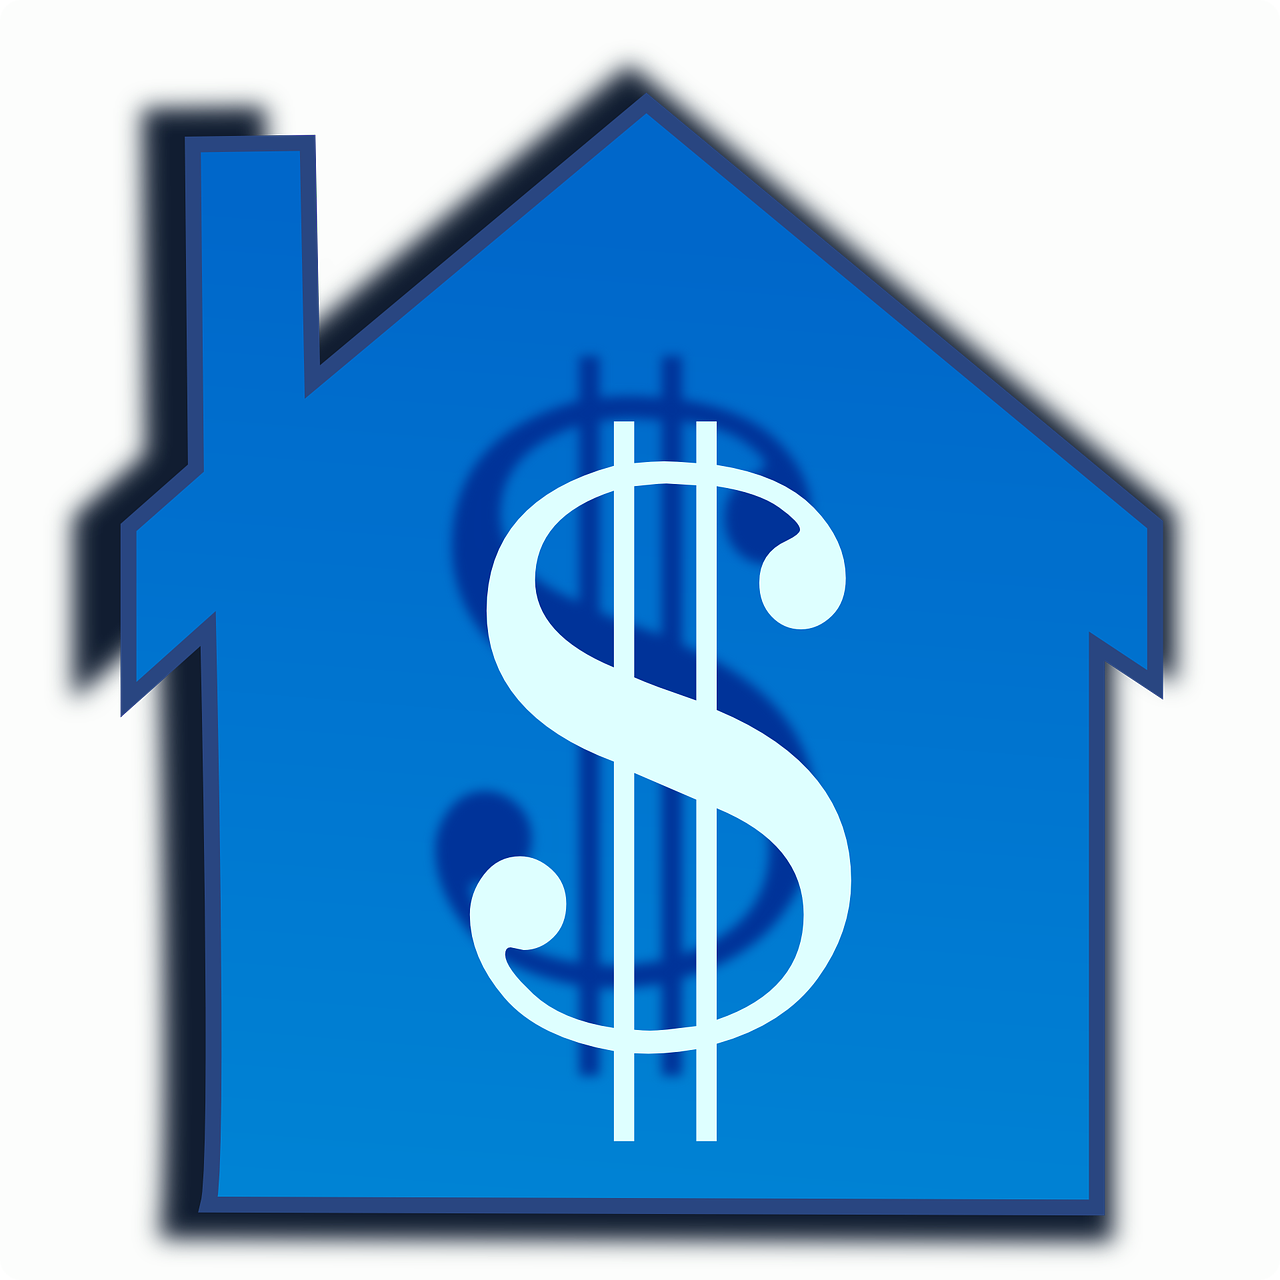 Build Hypothecary Credit, Home, House, Construction, - House Money Clip Art (1280x1280)